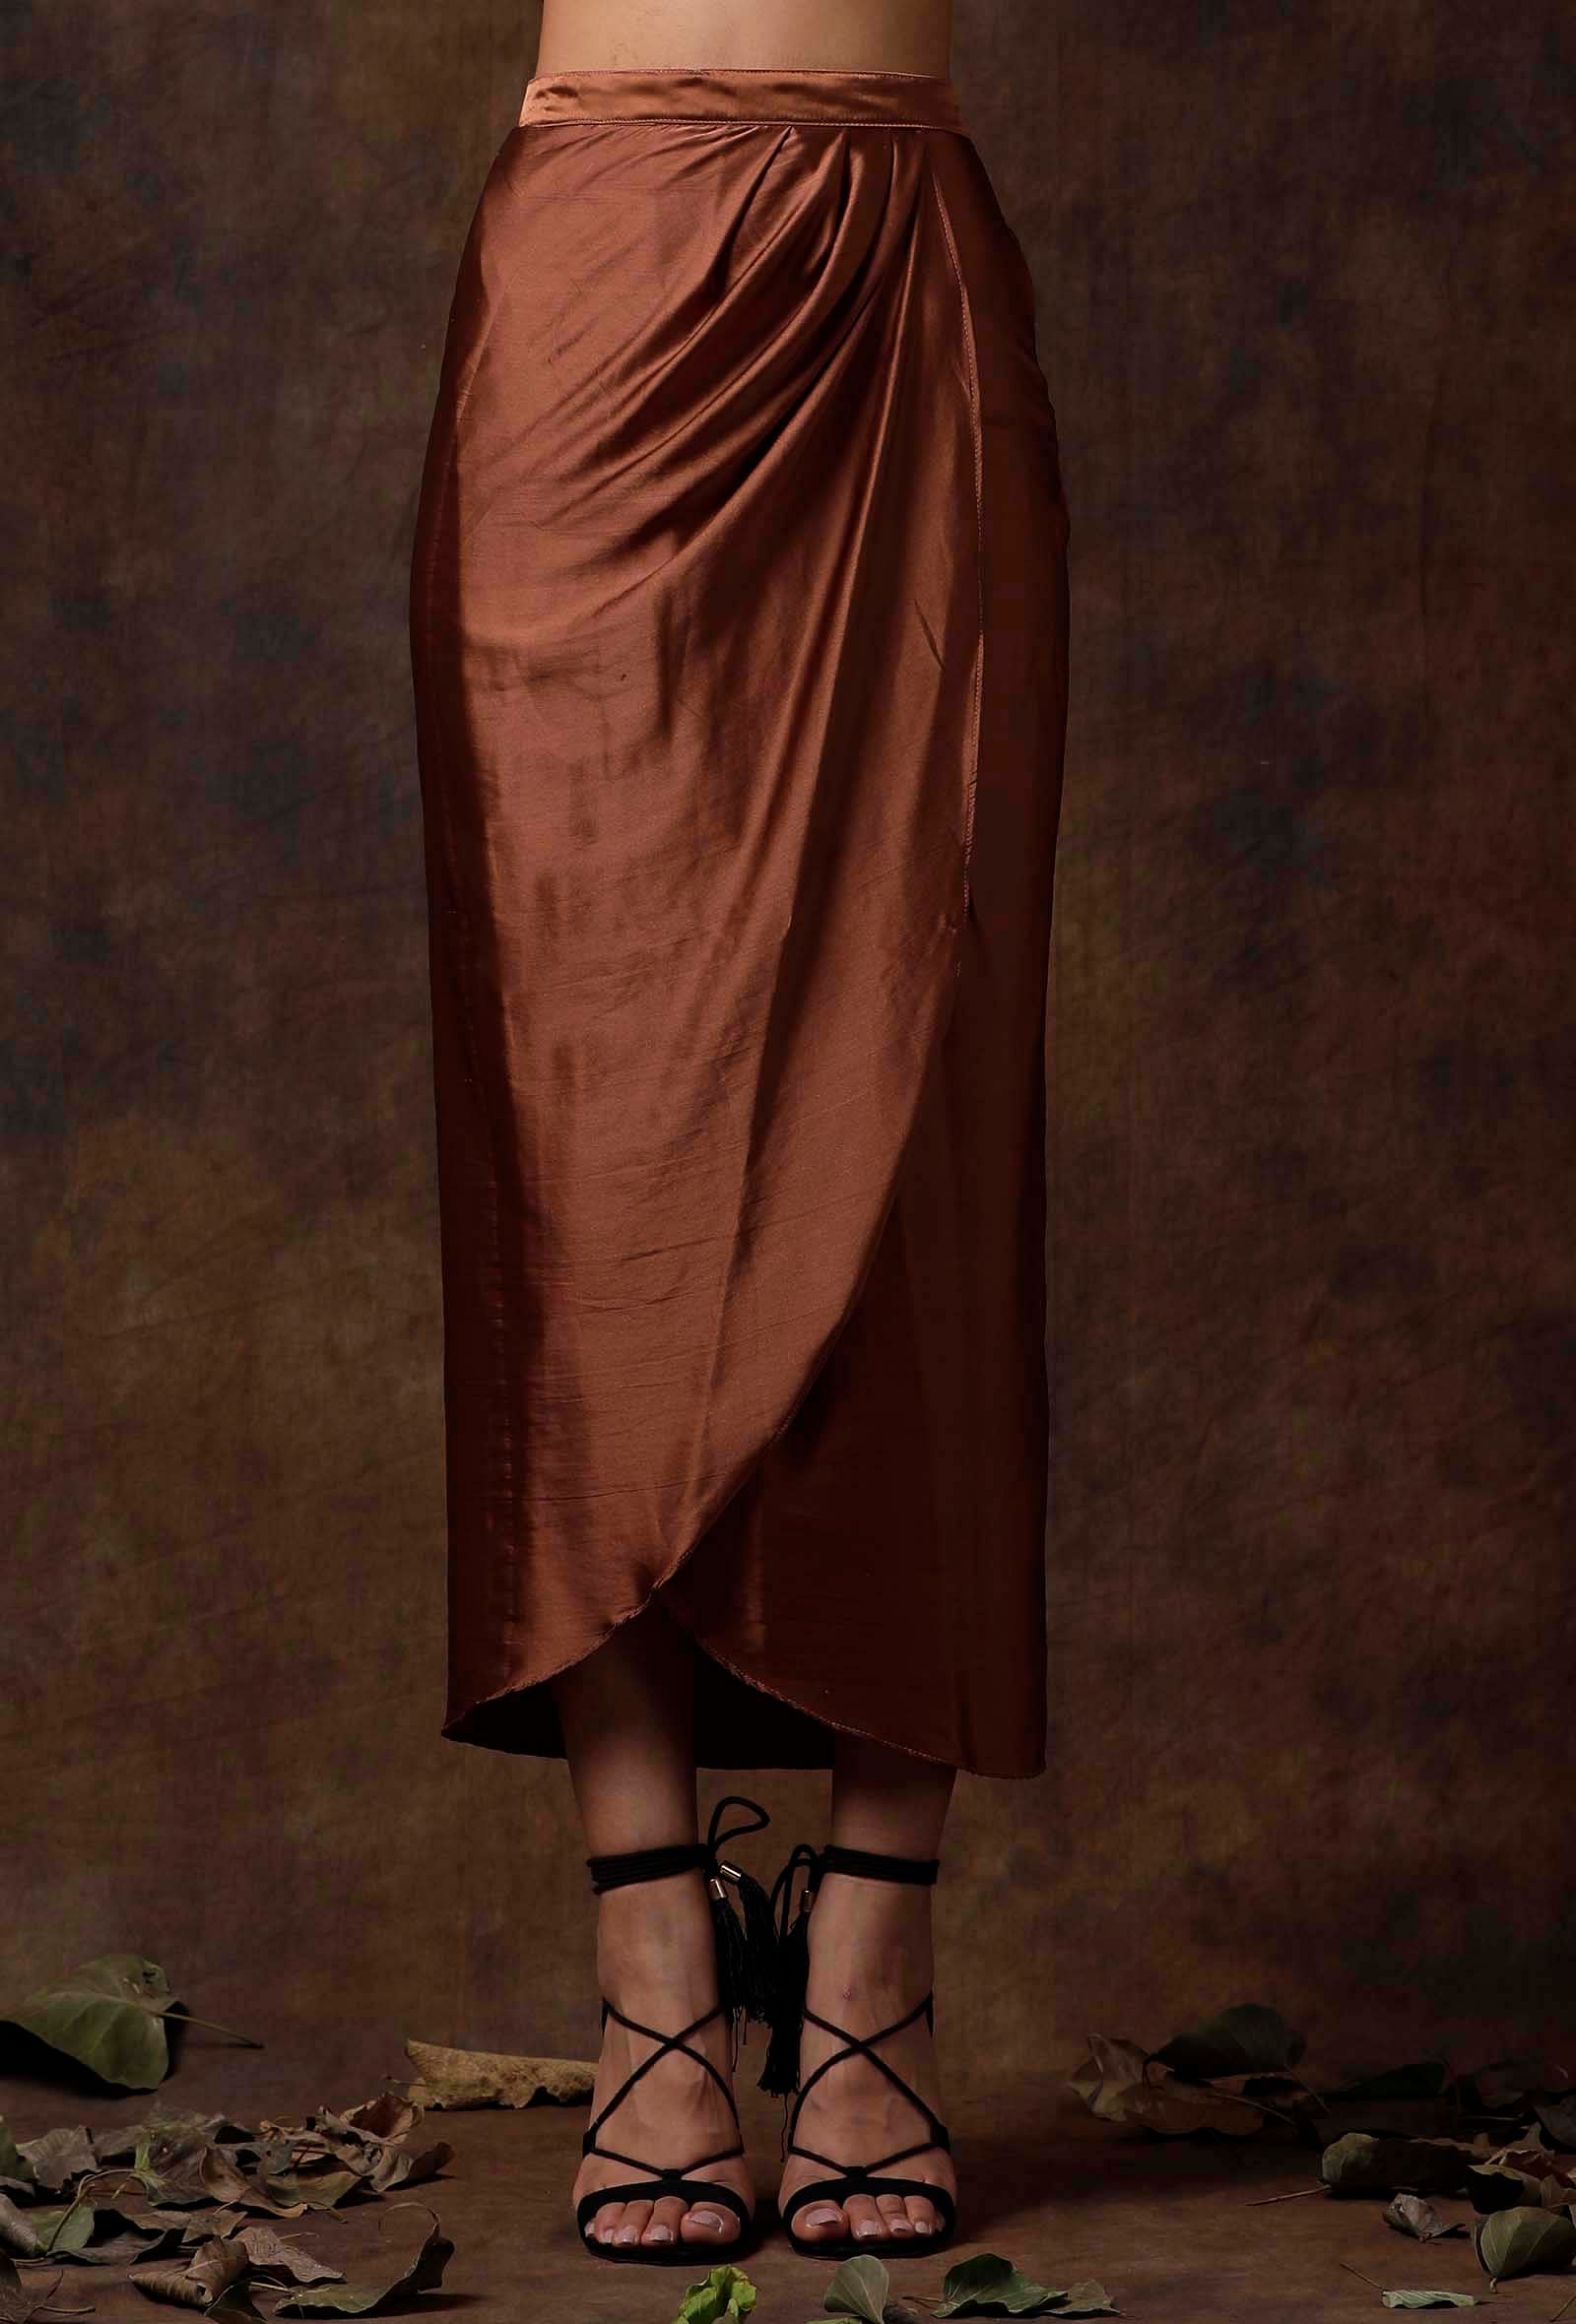 Russet Brown Overlap Stitched Skirt